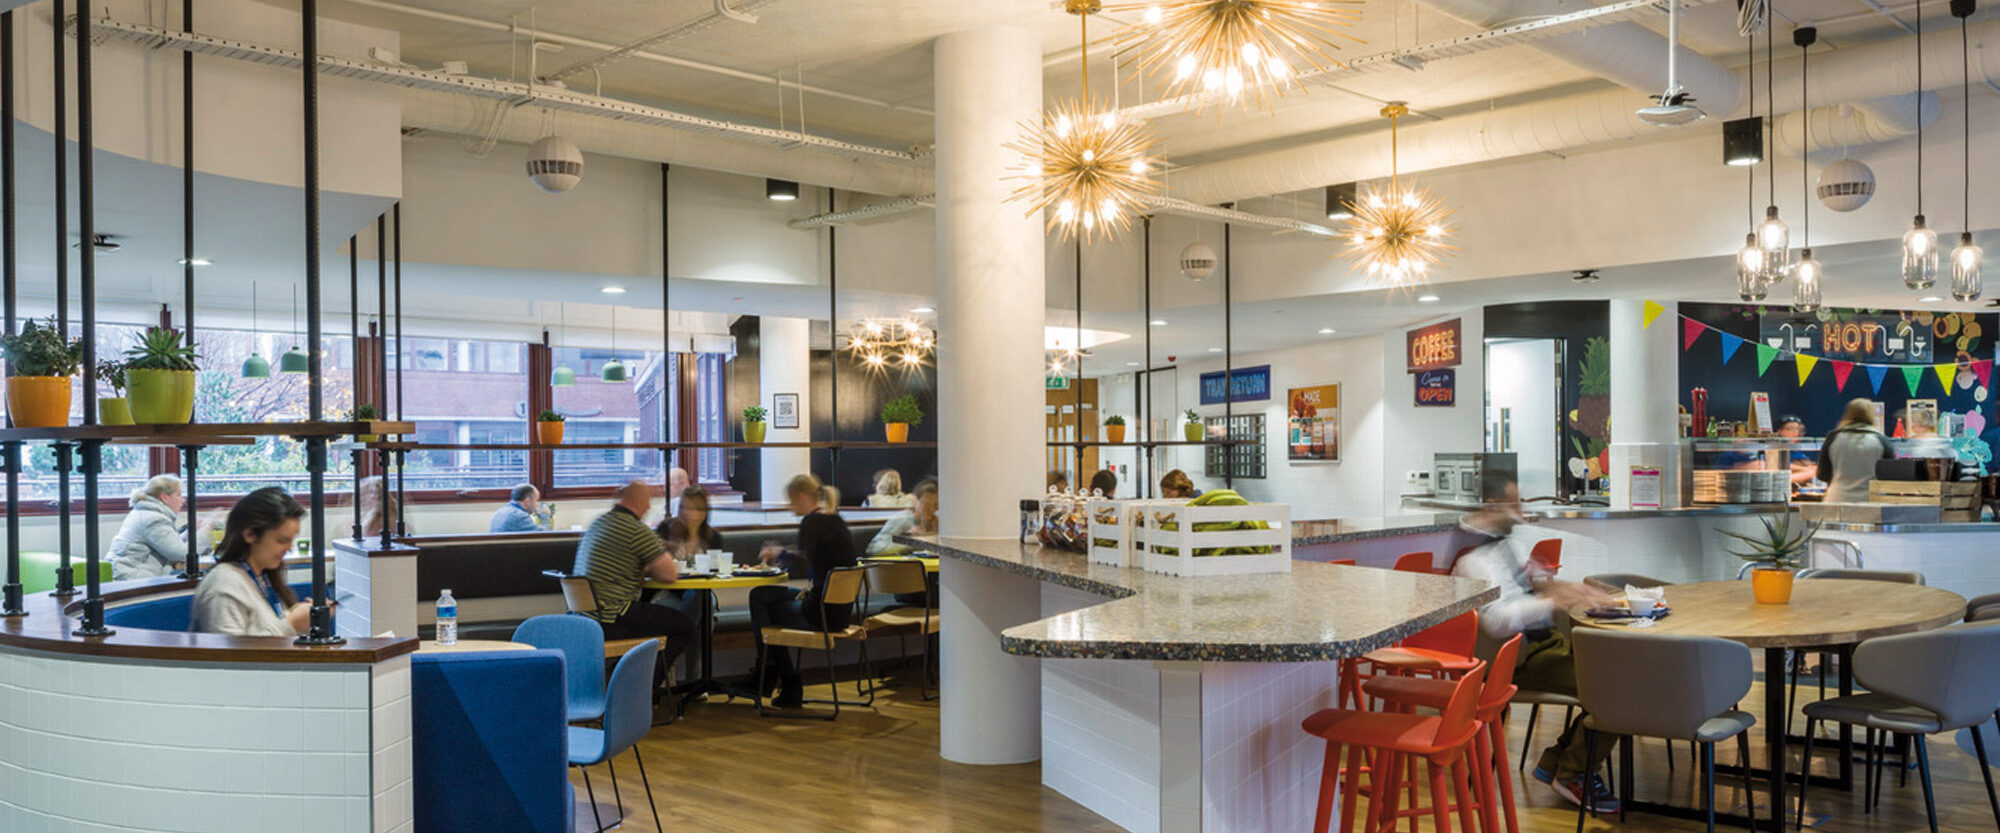 Spacious café interior with contemporary style, featuring an eclectic mix of seating arrangements, vibrant pendant lighting, and a white curved service counter. Exposed ductwork and concrete ceiling provide an industrial contrast to the warm wood tones and colorful decor.